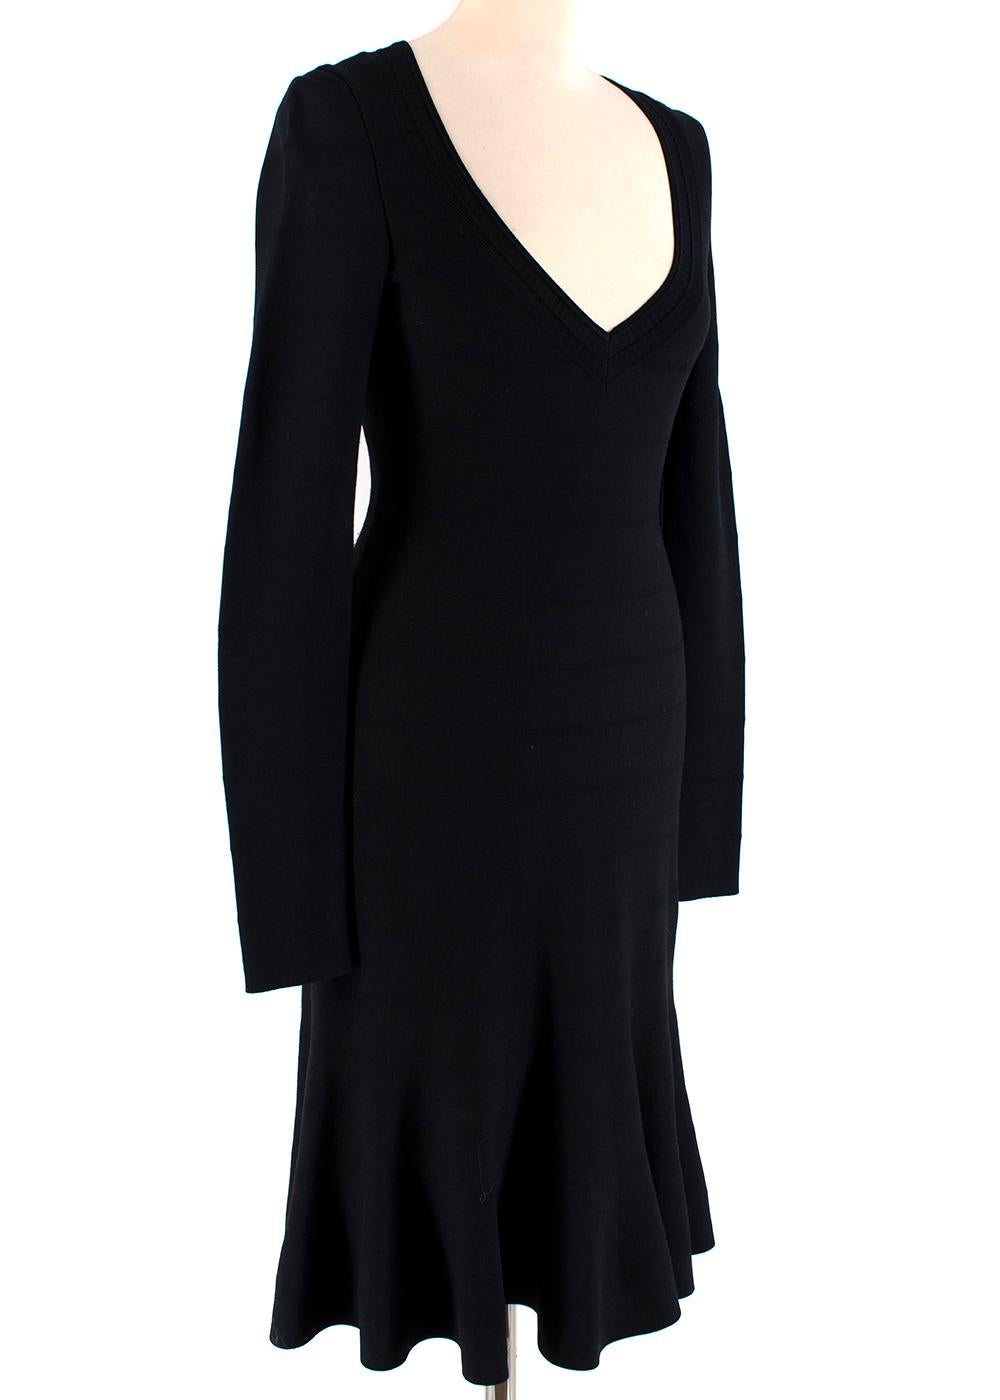 Alaia Black Knit Midi Fit and Flare Dress

- V- neck
- Fully Banded
- Fitted and Flared Silhouette 
- Hidden Back Zip Fastening 
- Ribbed Pattern on Neckline 

Material:
- 86% Fleece Wool 
- 12% Nylon 
- 2% Elastodine

Made in Italy
Measurements are